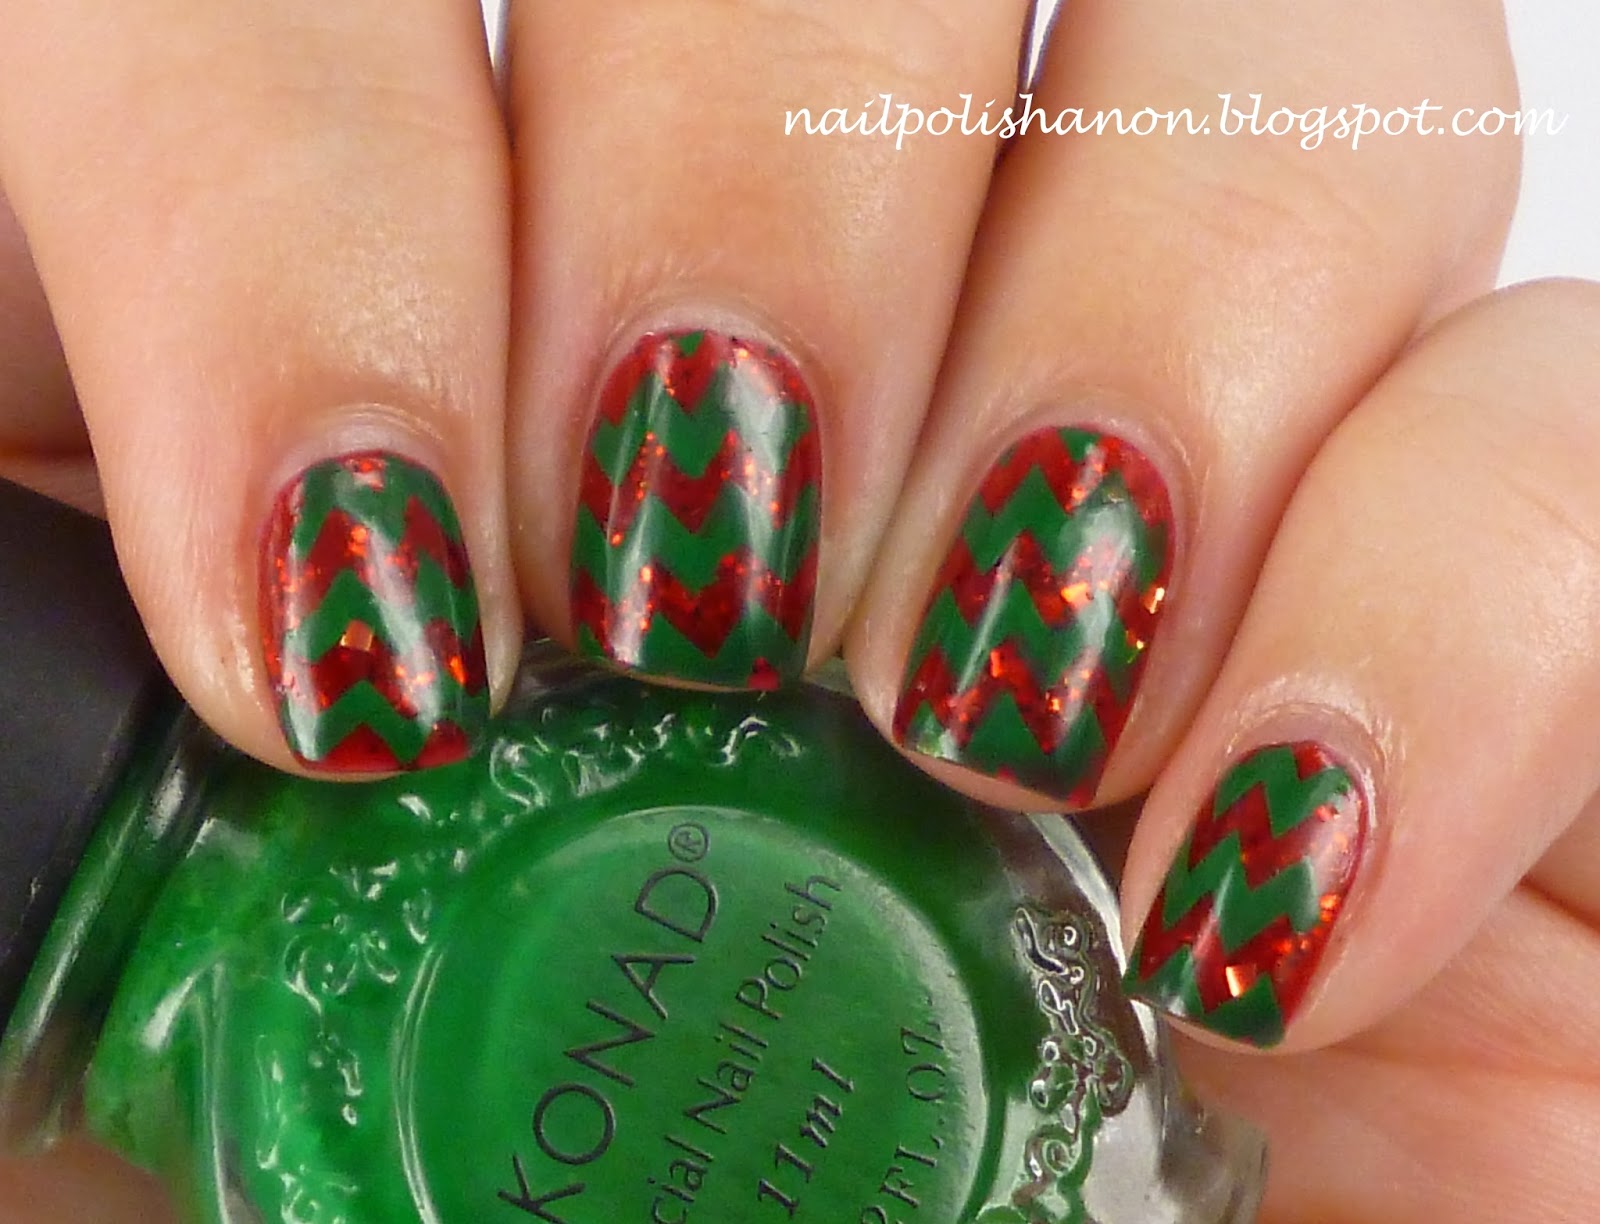 Nail Polish Anon: Christmas Wrapping Paper Manicures